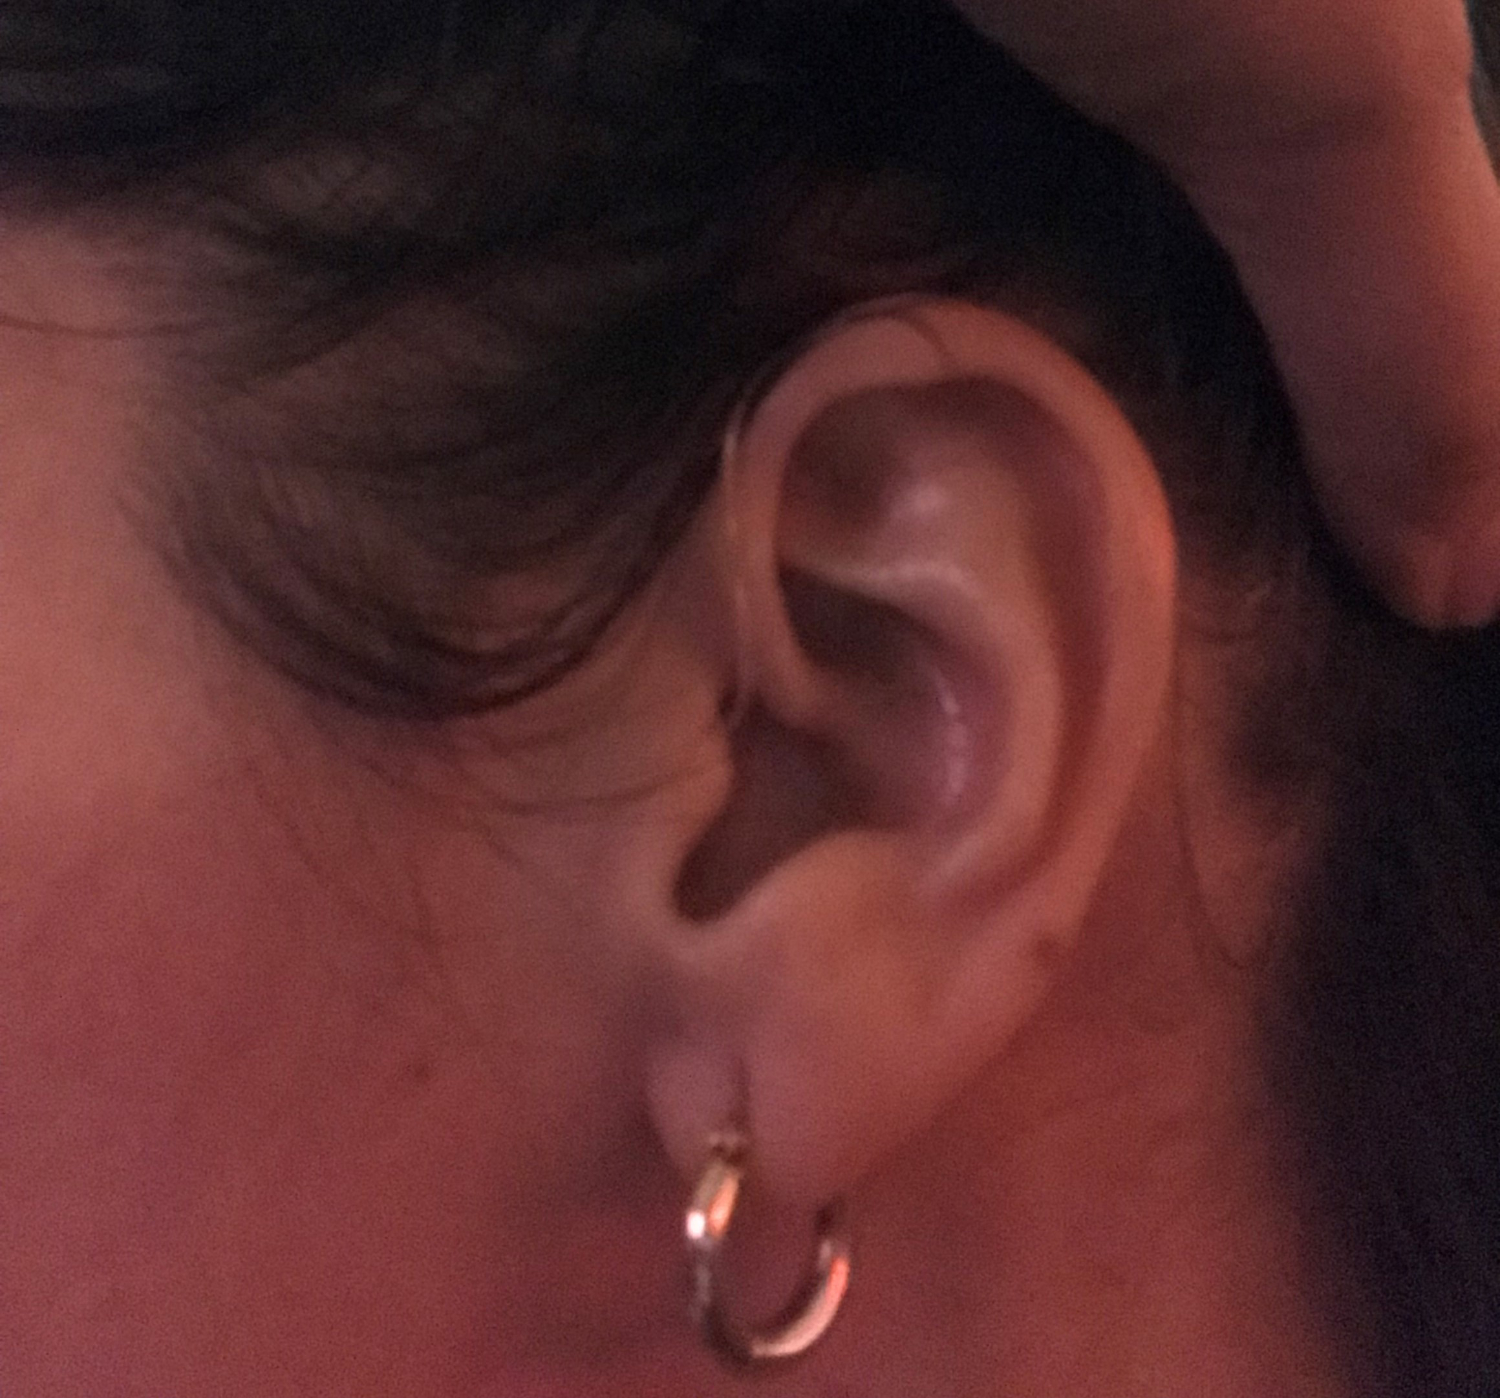 Close-up of my left ear with my new hearing aids. You can barely see a wire coming out of my ear canal and making its way behind my ear.